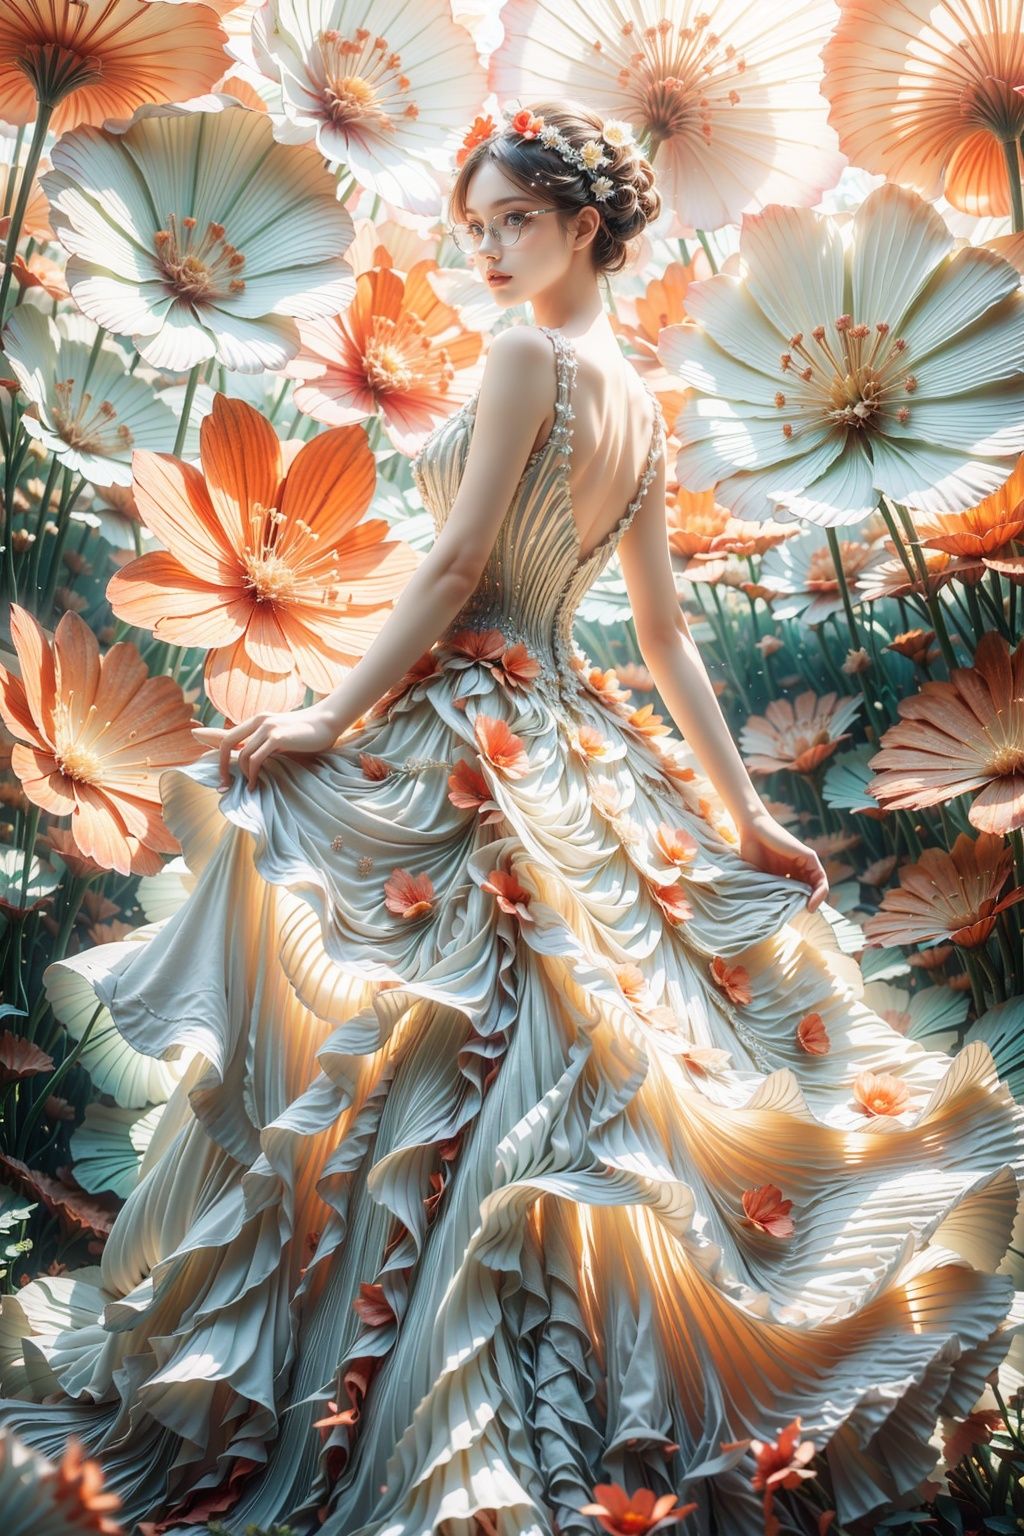 Movie stills, 1 girl, flowing hair, (glowing dress), colorful pleated skirt, running in the flowers, looking back, glasses, dreamy scenes, exquisite facial features, extremely beautiful face, clear details, soft lighting background, light particles, blue and orange lighting, masterpiece, best quality